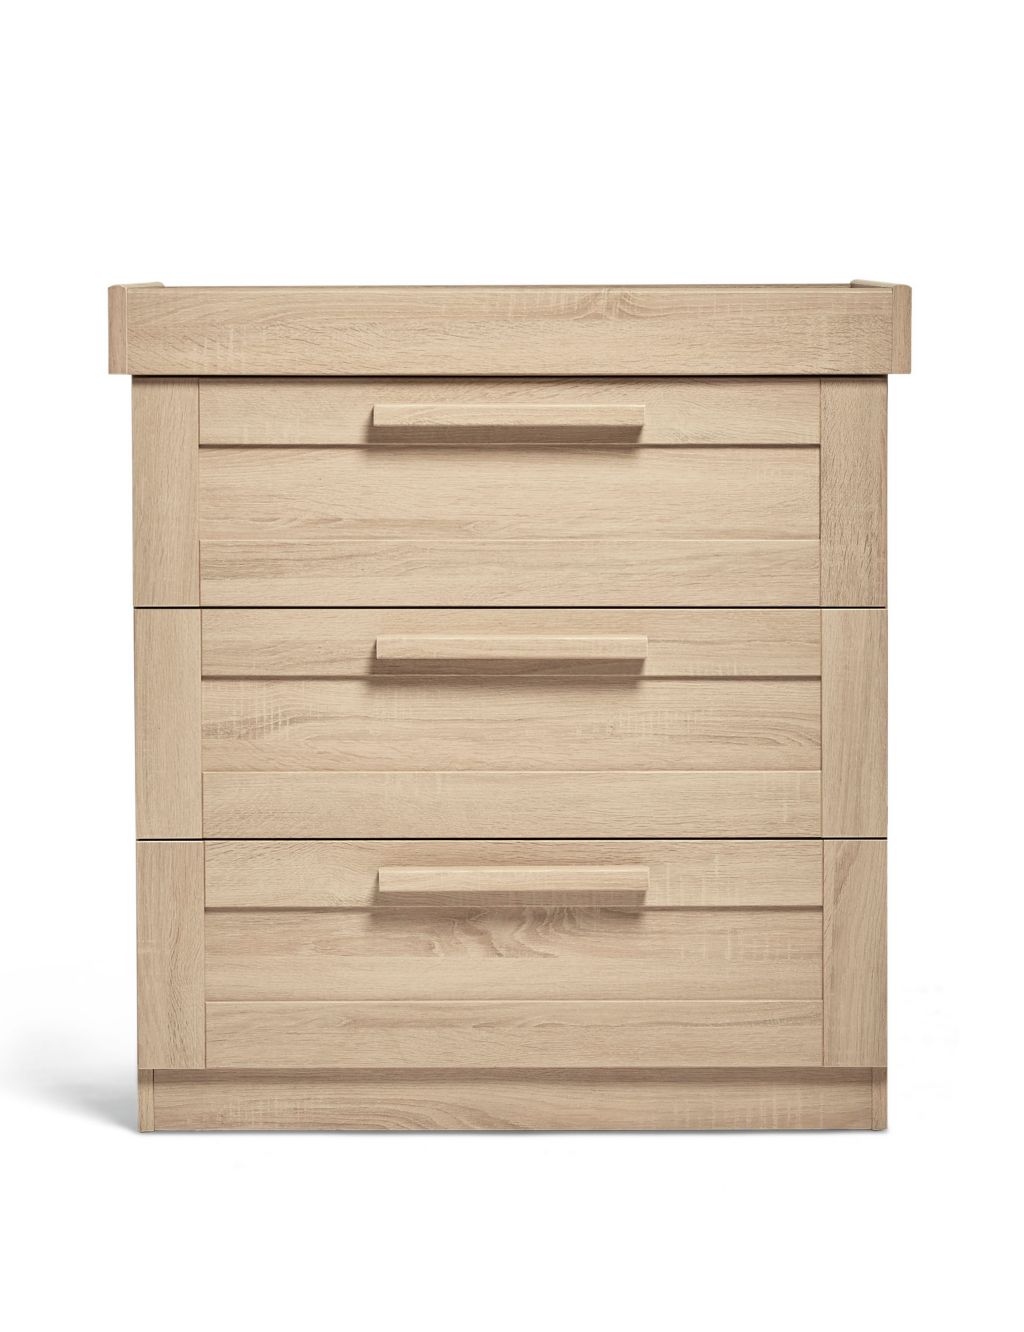 Atlas 3 Piece Cotbed Range with Dresser and Wardrobe image 6